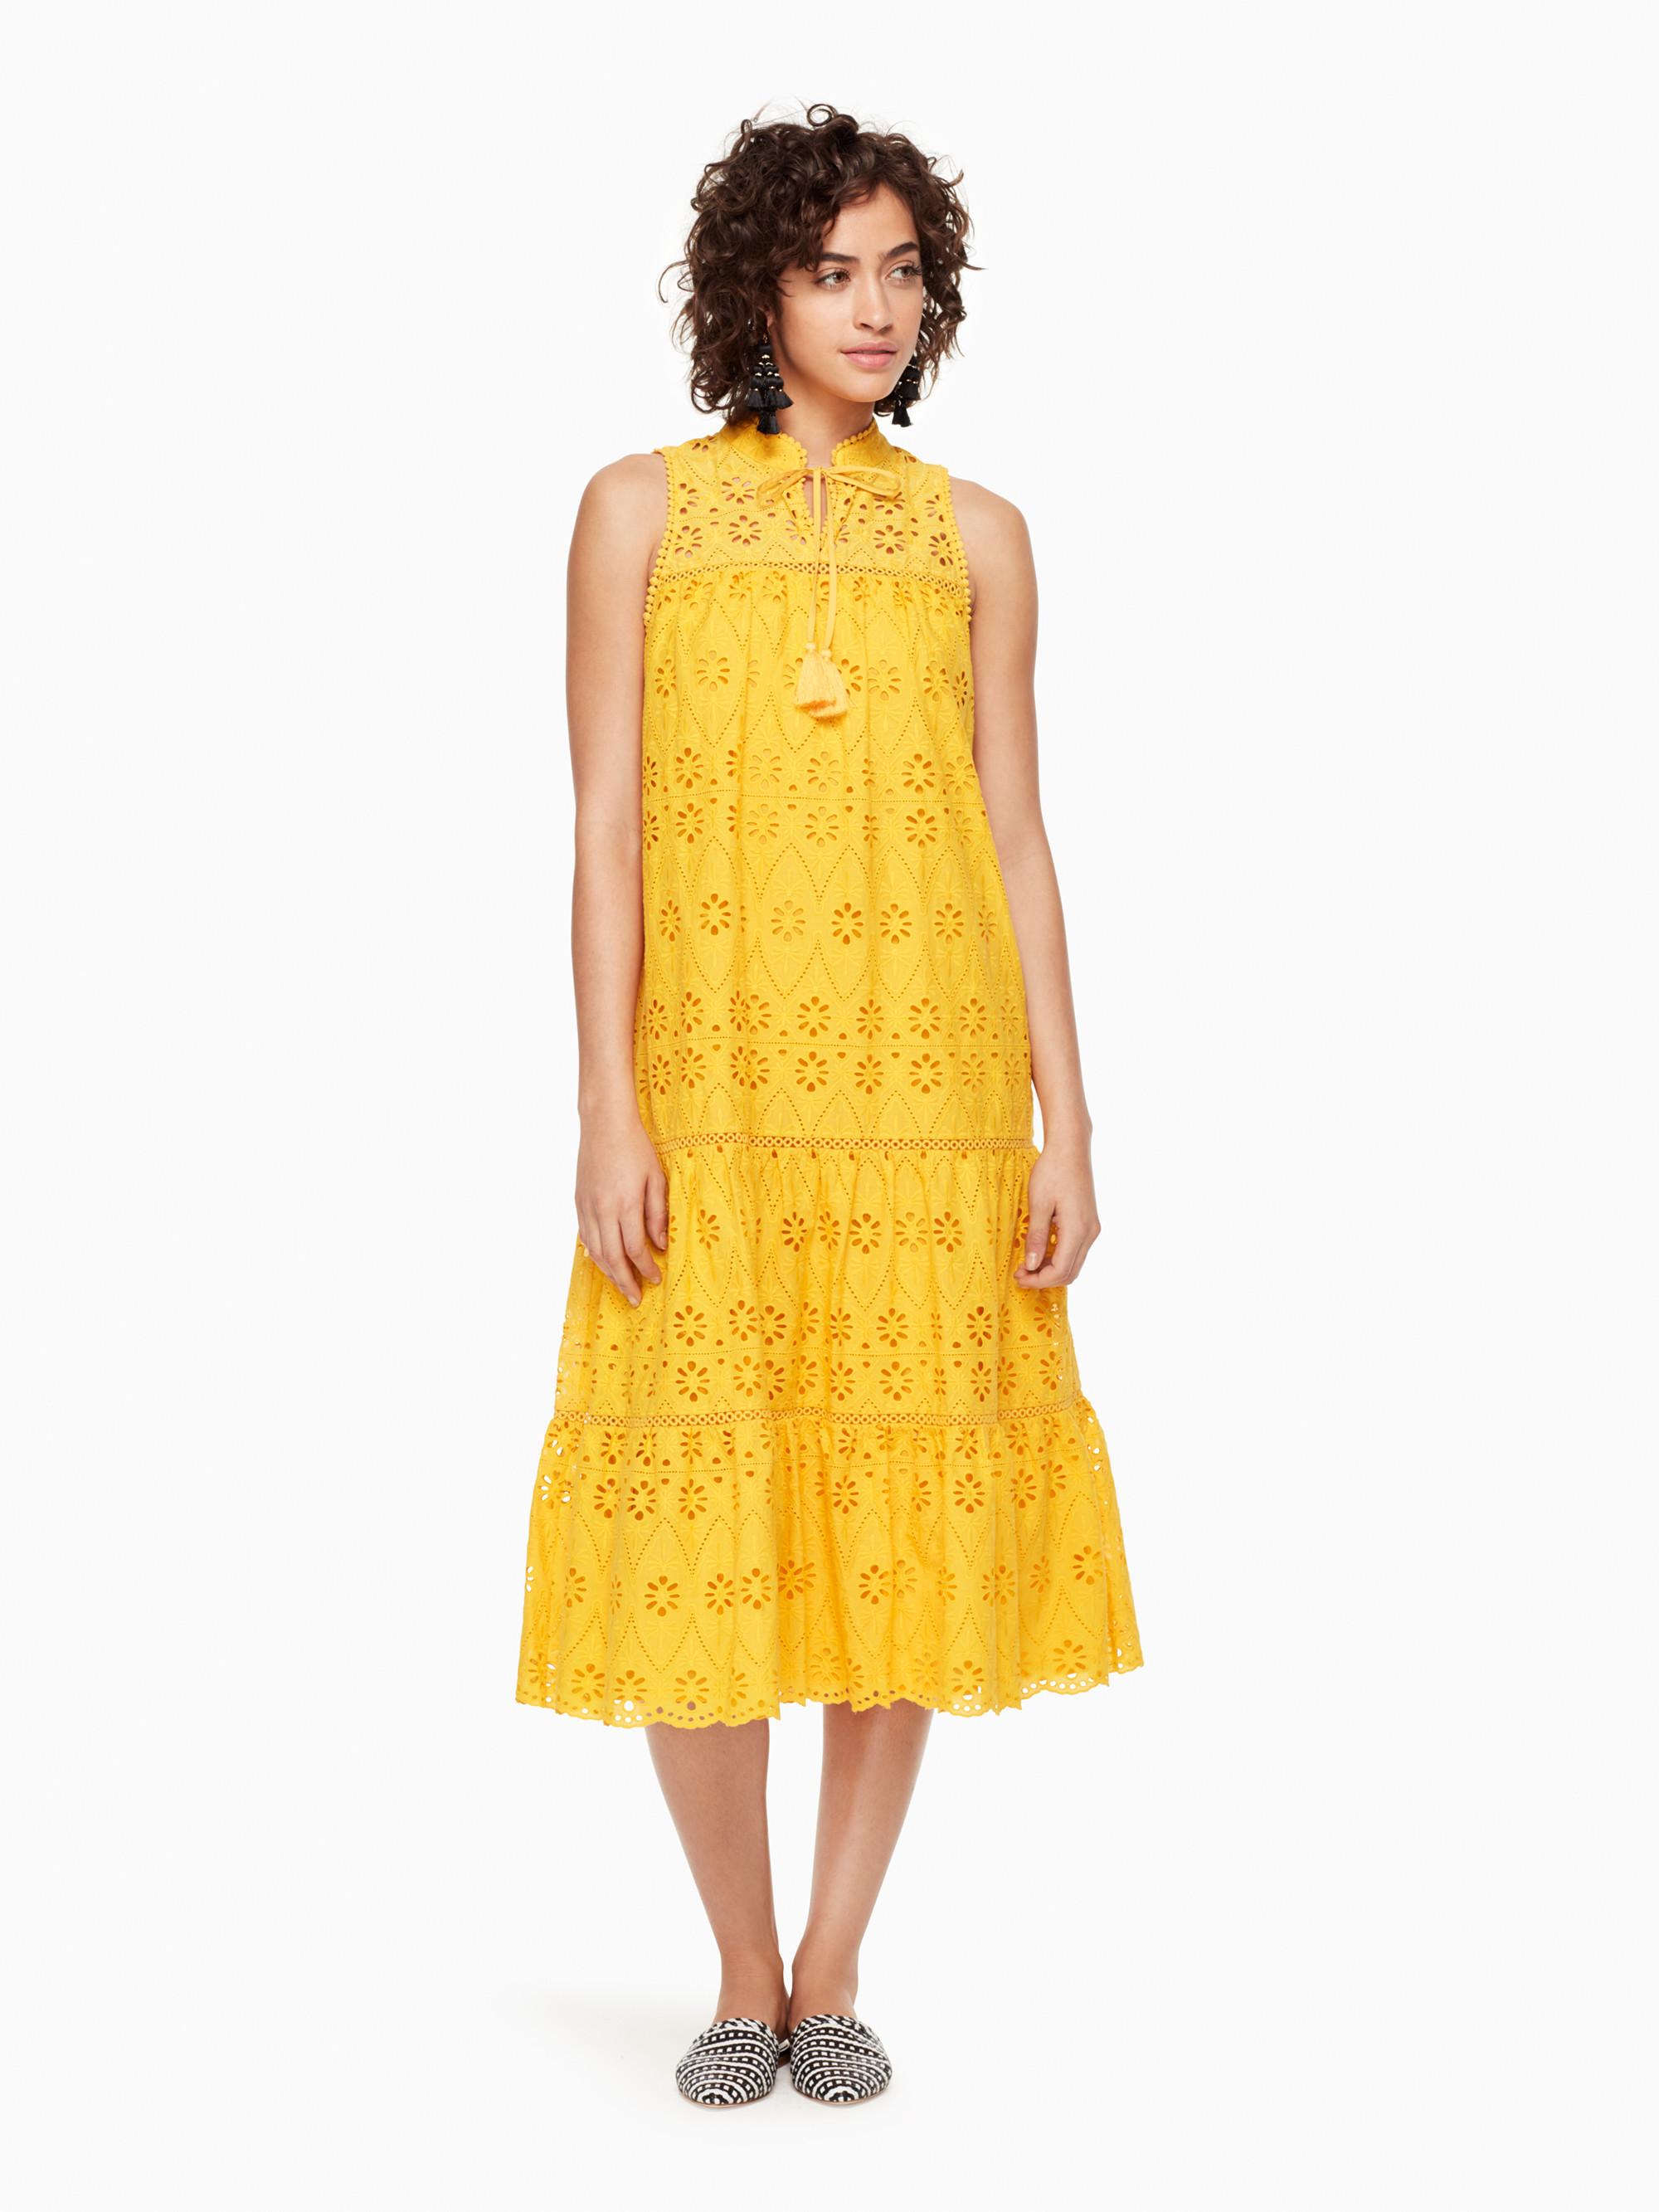 Kate Spade Lace Eyelet Patio Dress in Yellow - Lyst